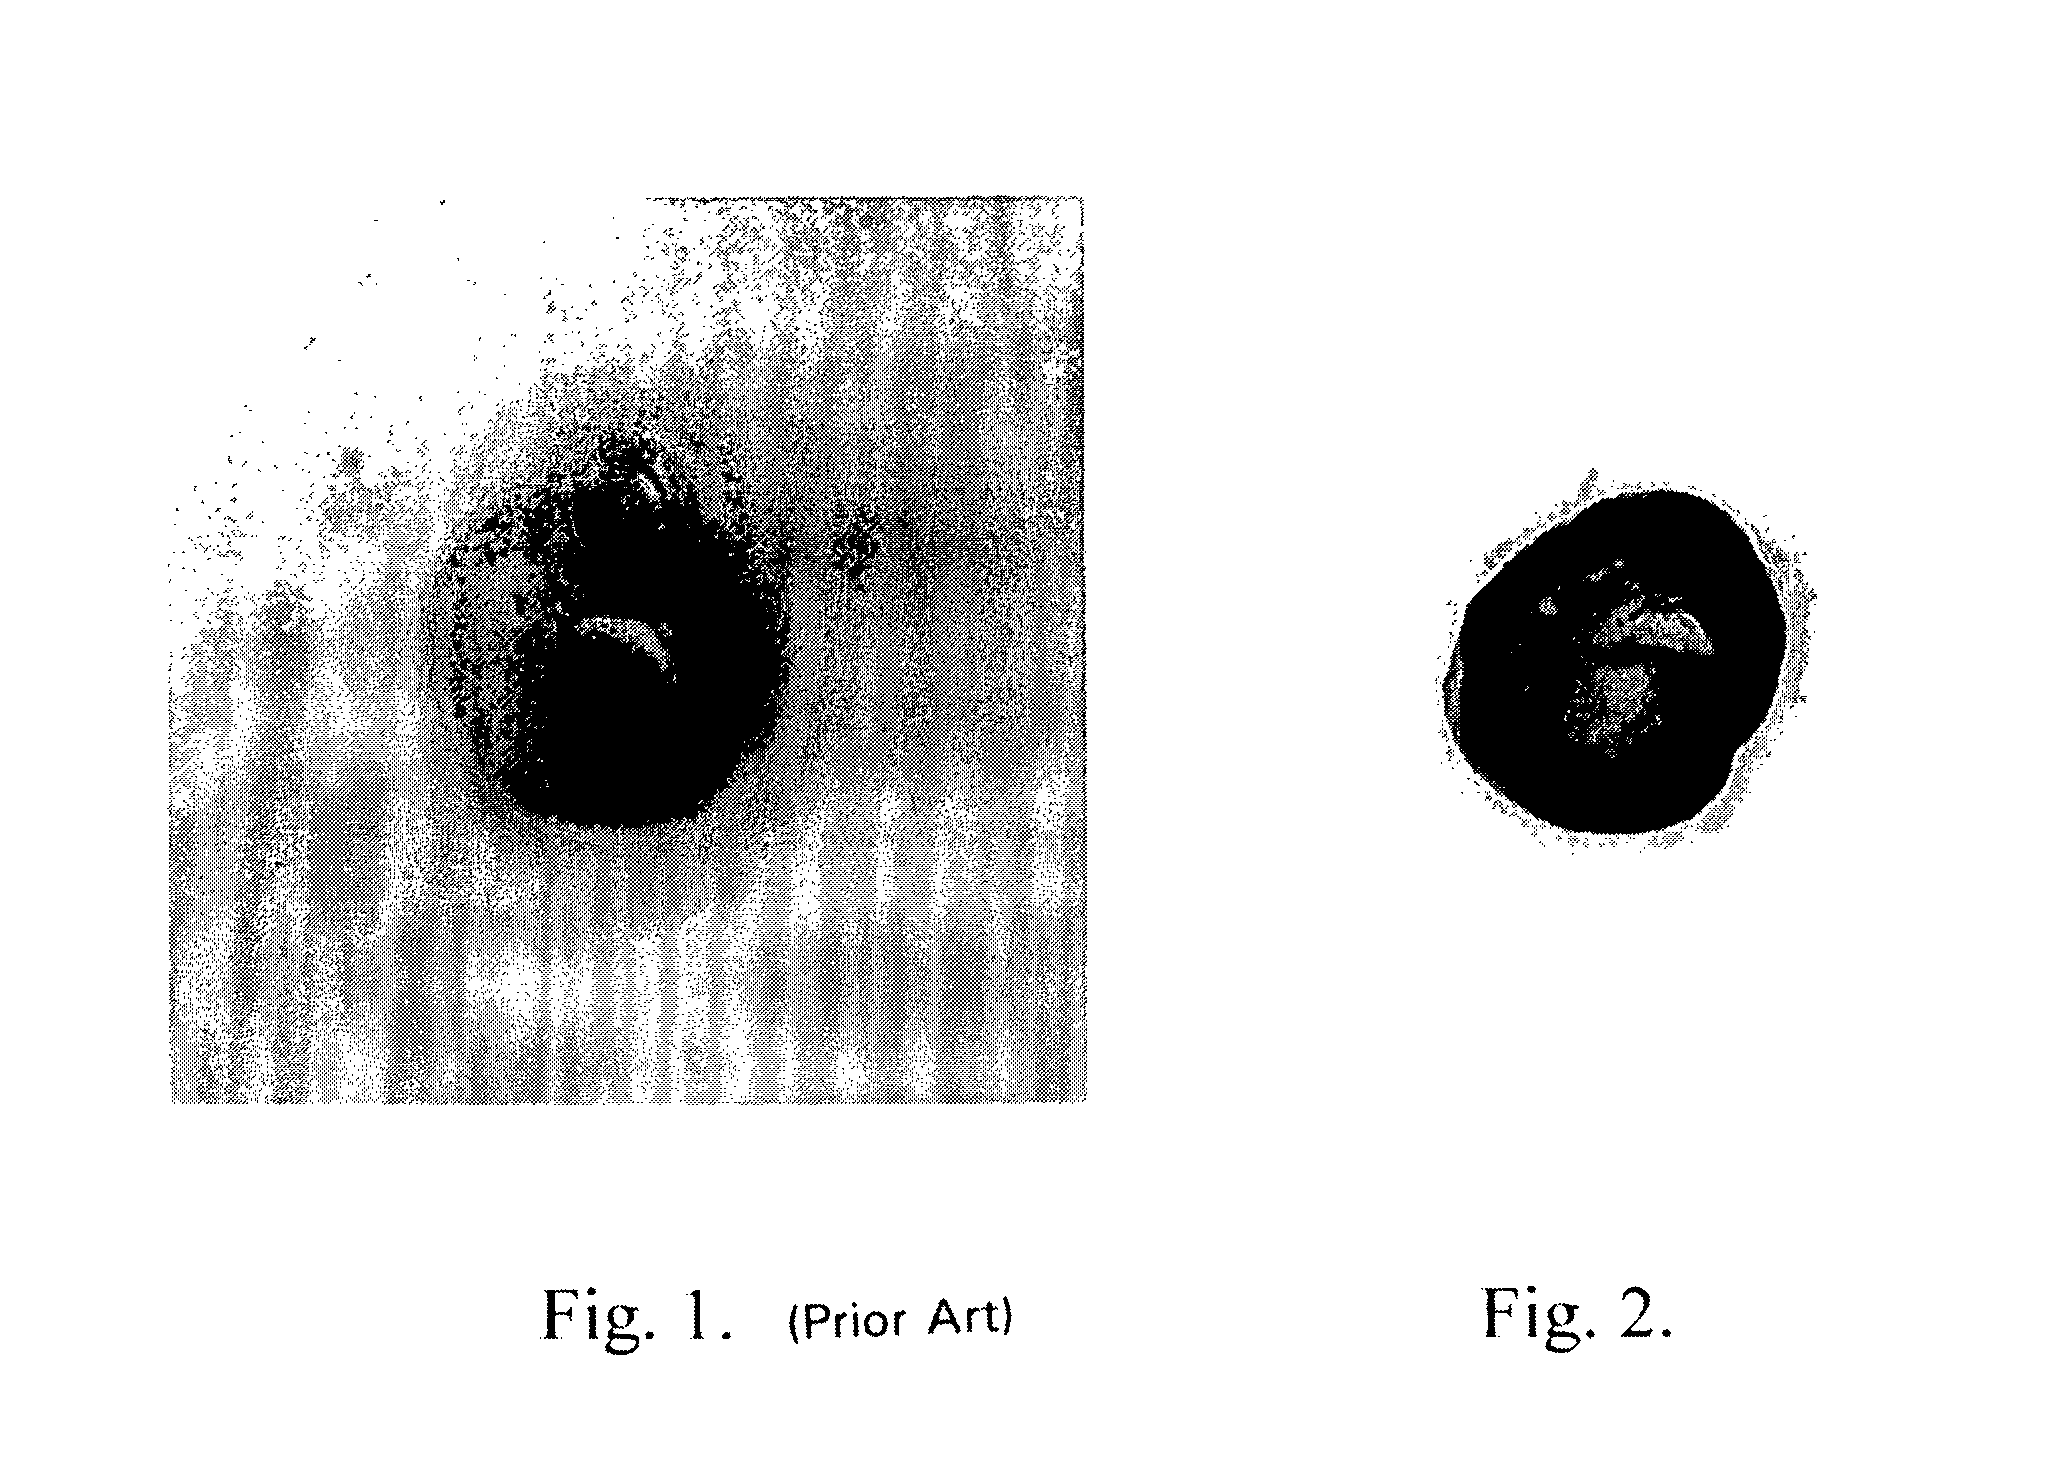 Test methods using enzymatic deposition and alteration of metals